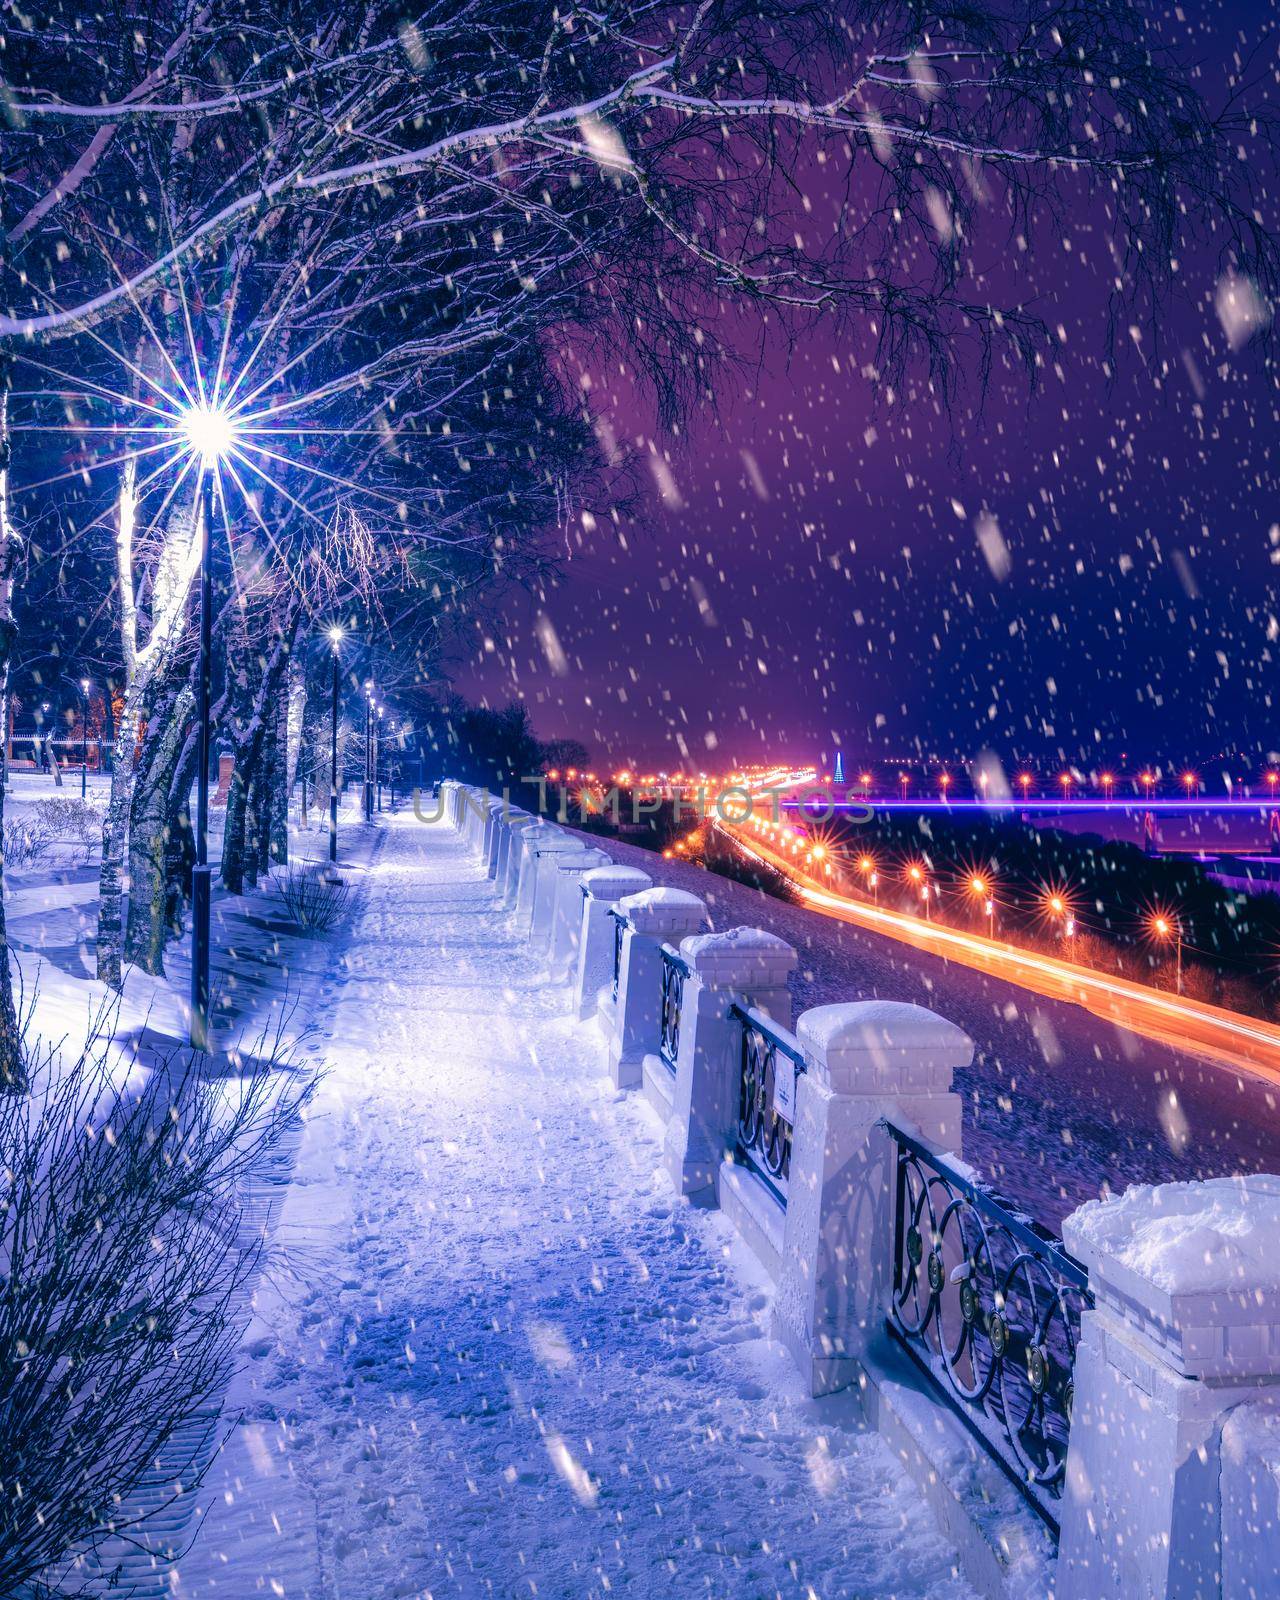 Snowfall in a winter night park with lanterns, view to road with car motion, pavement and trees covered with snow. by Eugene_Yemelyanov